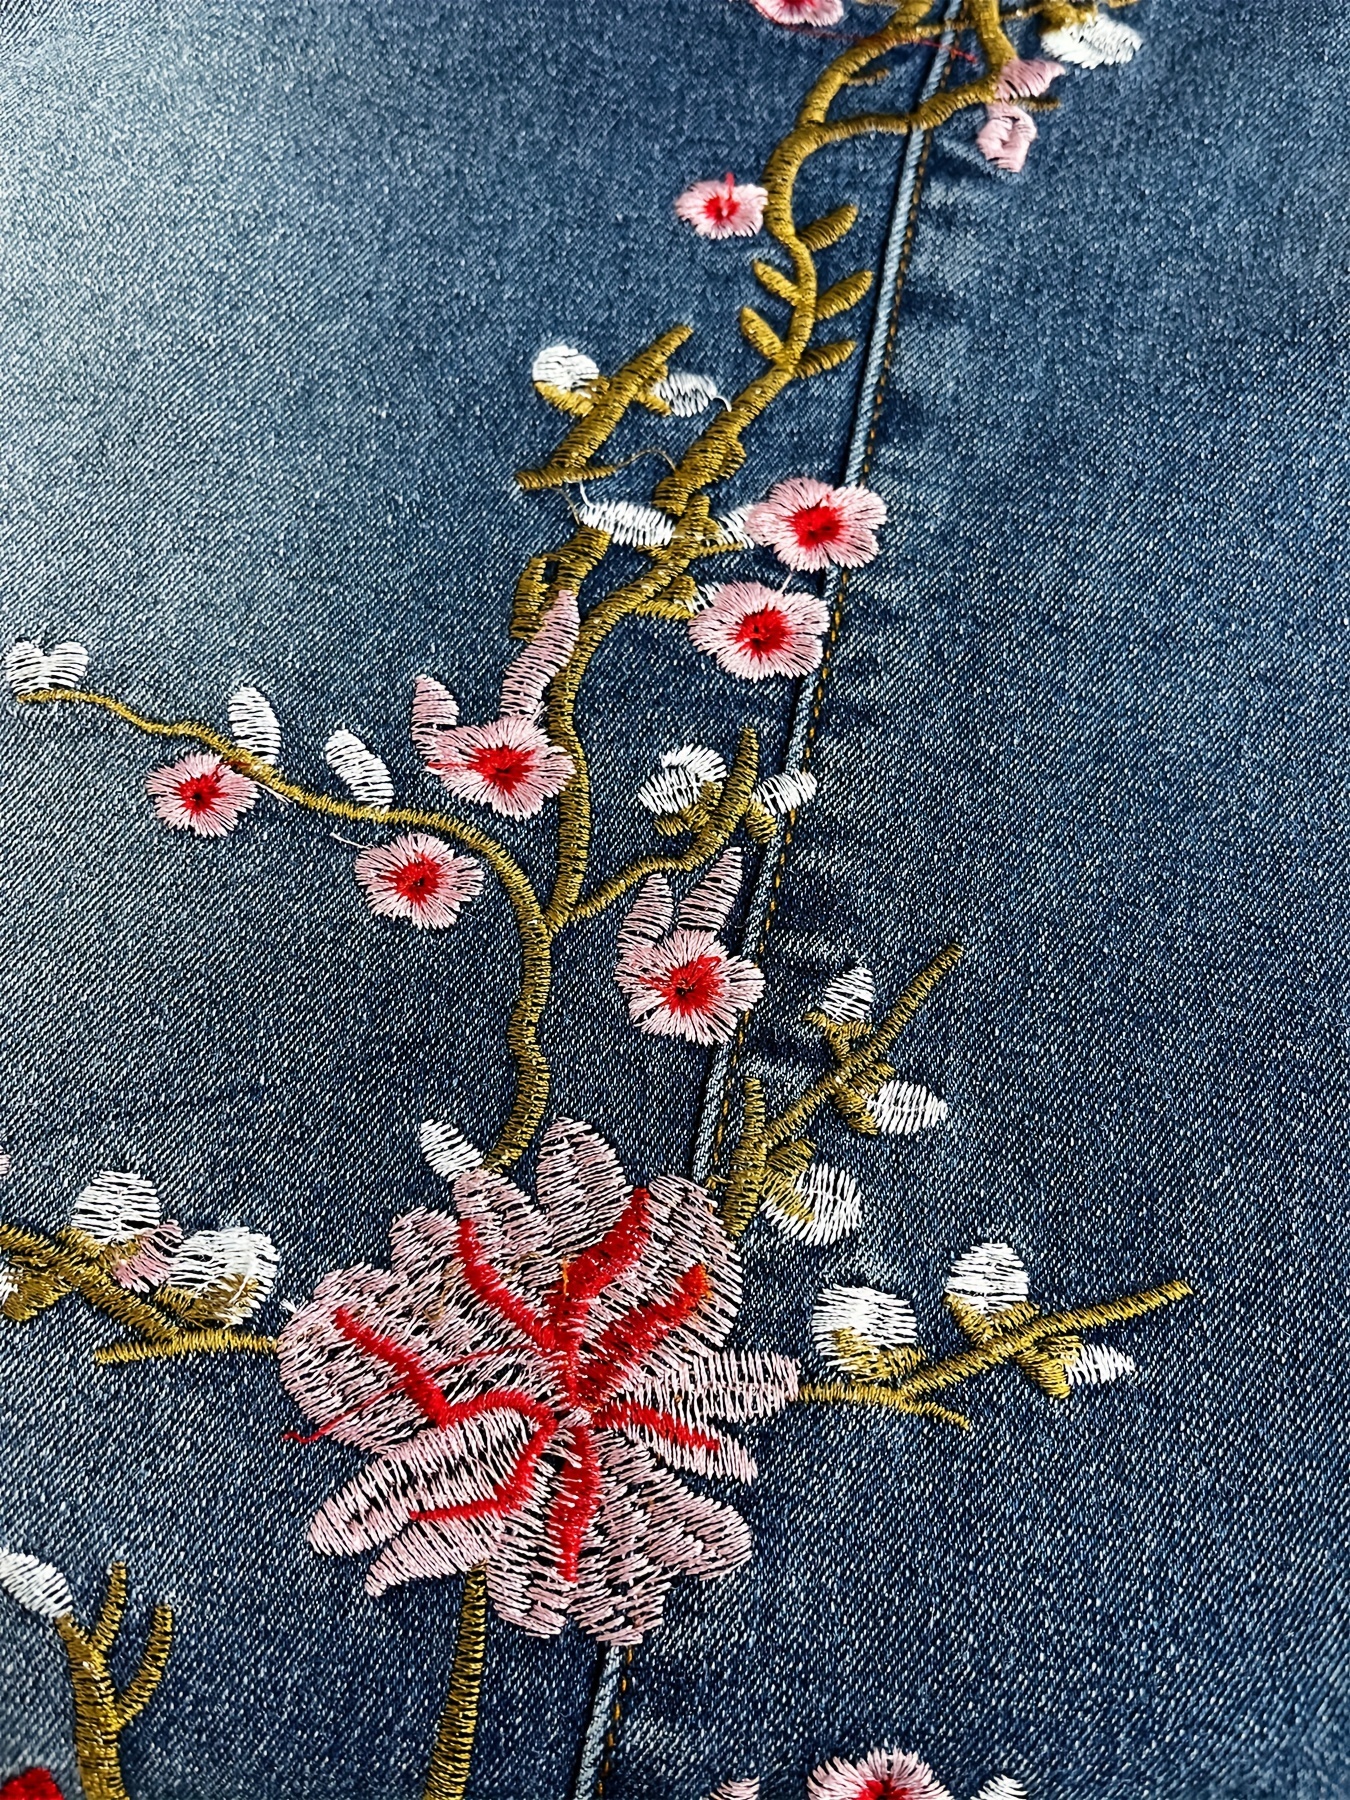 YCZDG Tall Women Flower Embroidered Jeans Retro Plus Size High